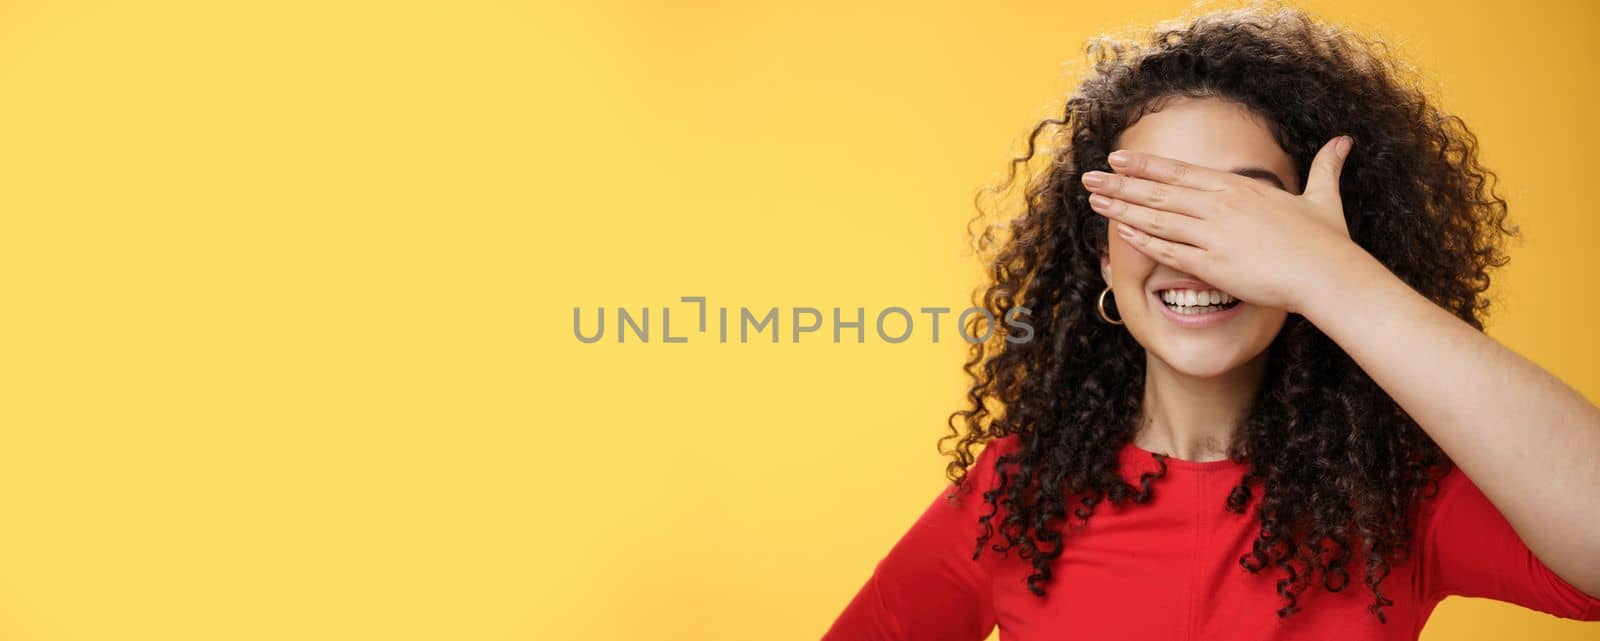 Lifestyle. Close-up shot of dreamy happy young cute woman with curly hair covering eyes with palm as counting or playing peekaboo smiling broadly anticipating surprise happen over yellow background.